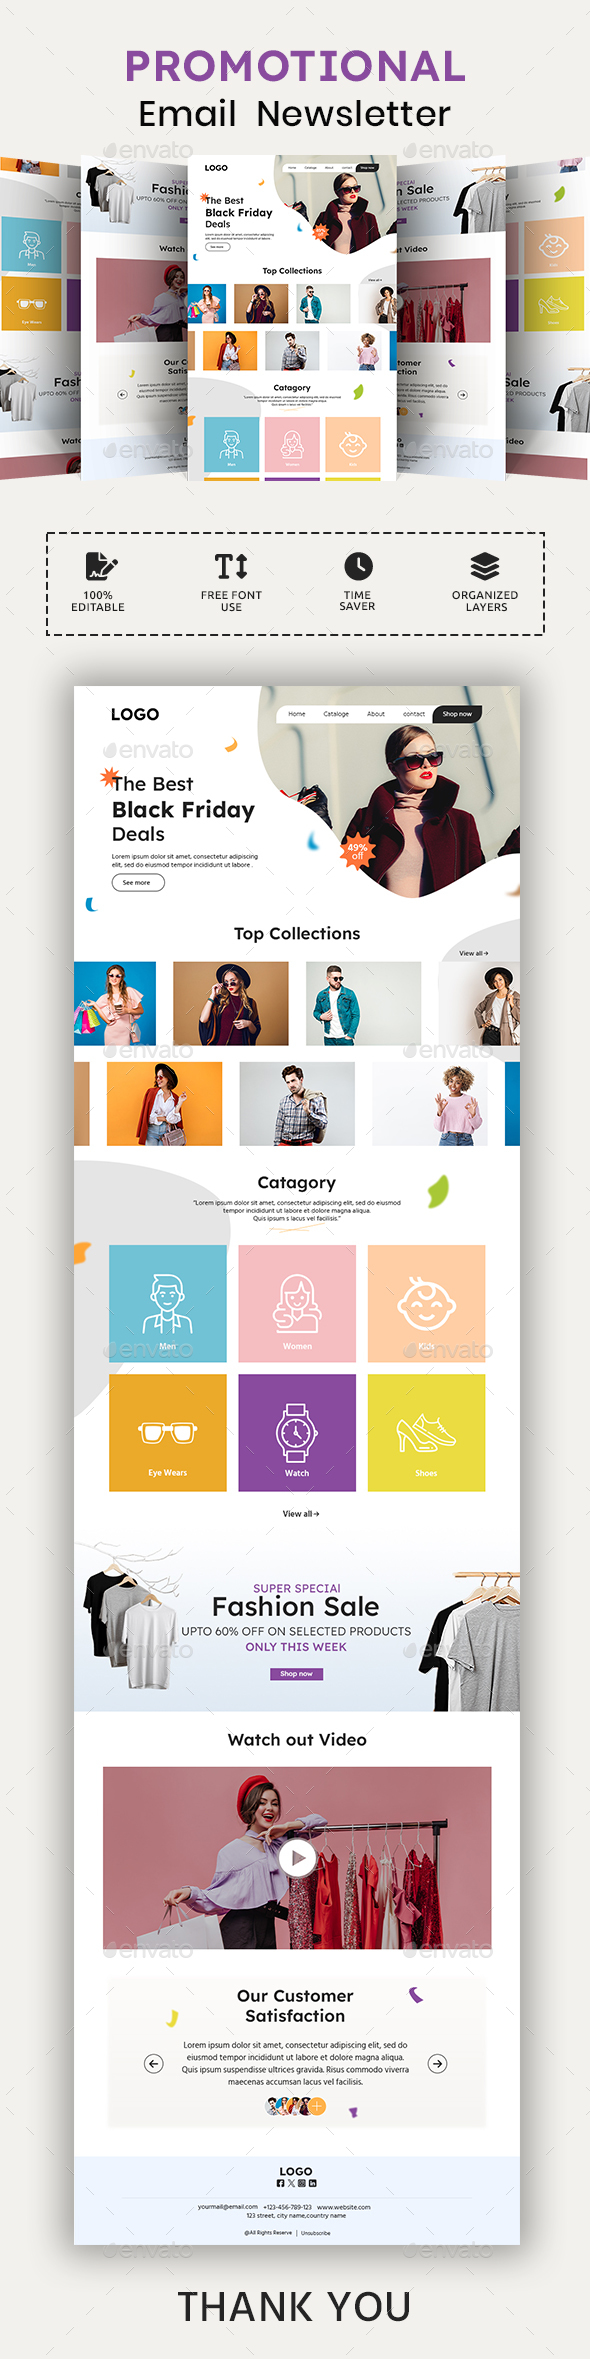 [DOWNLOAD]Fashion Clothing Email Newsletter PSD Template